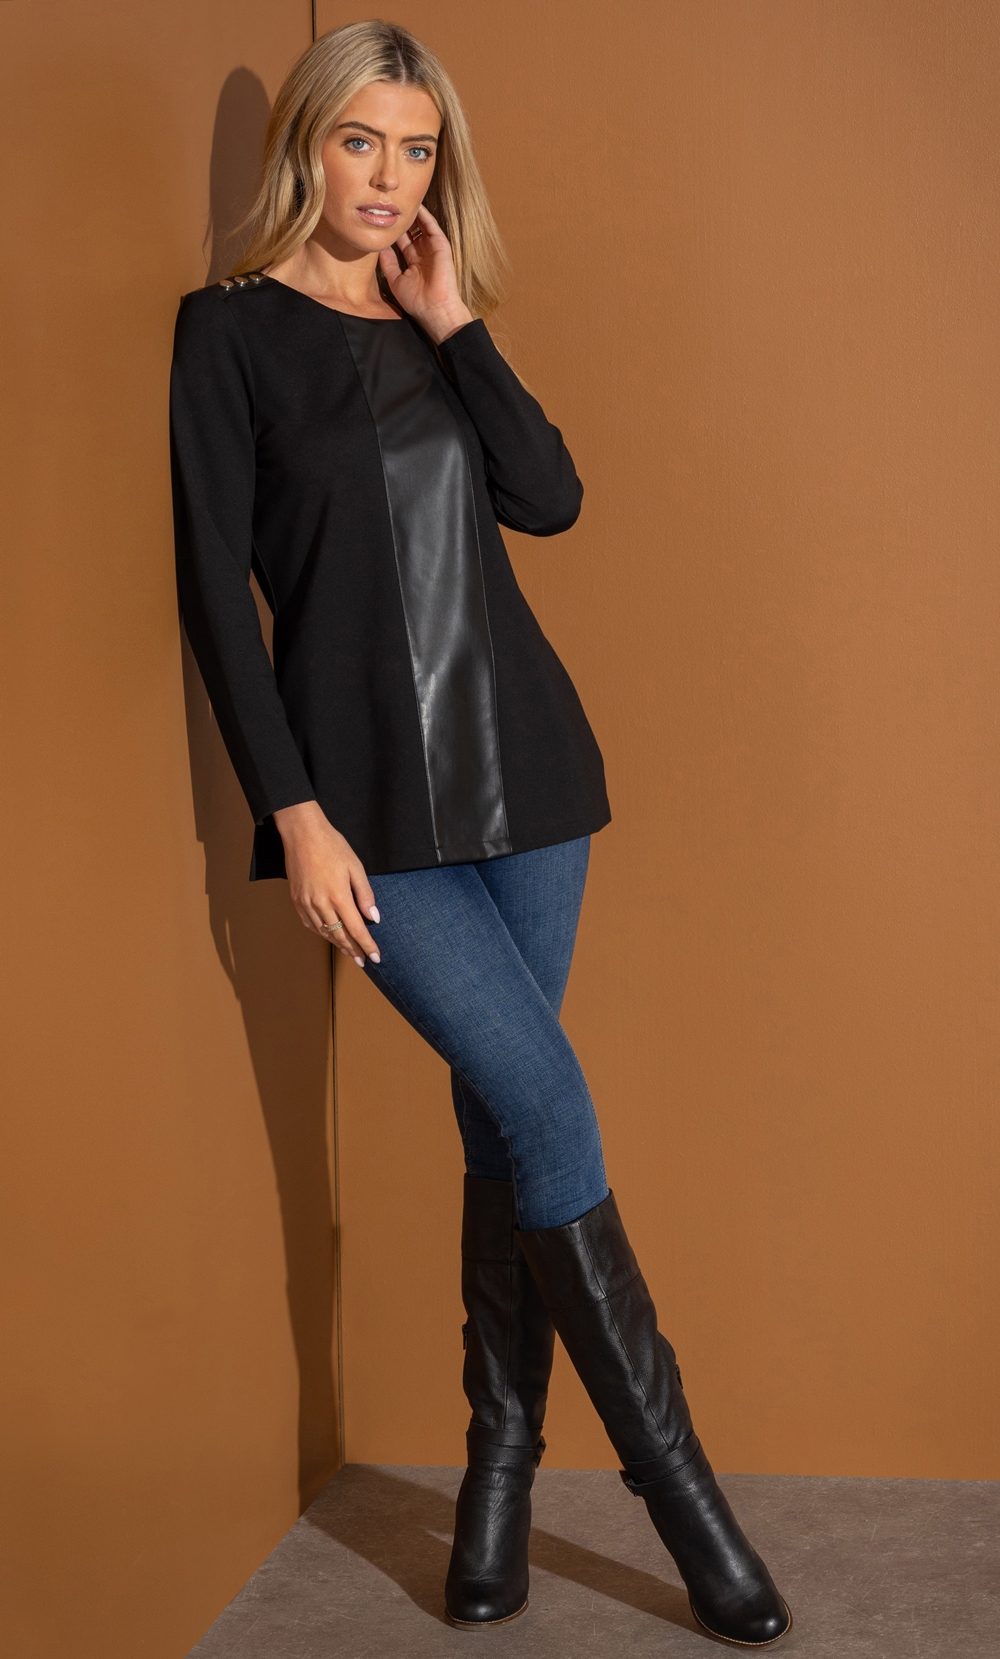 Brands - Klass Faux Leather And Ponte Tunic Top Black Women’s